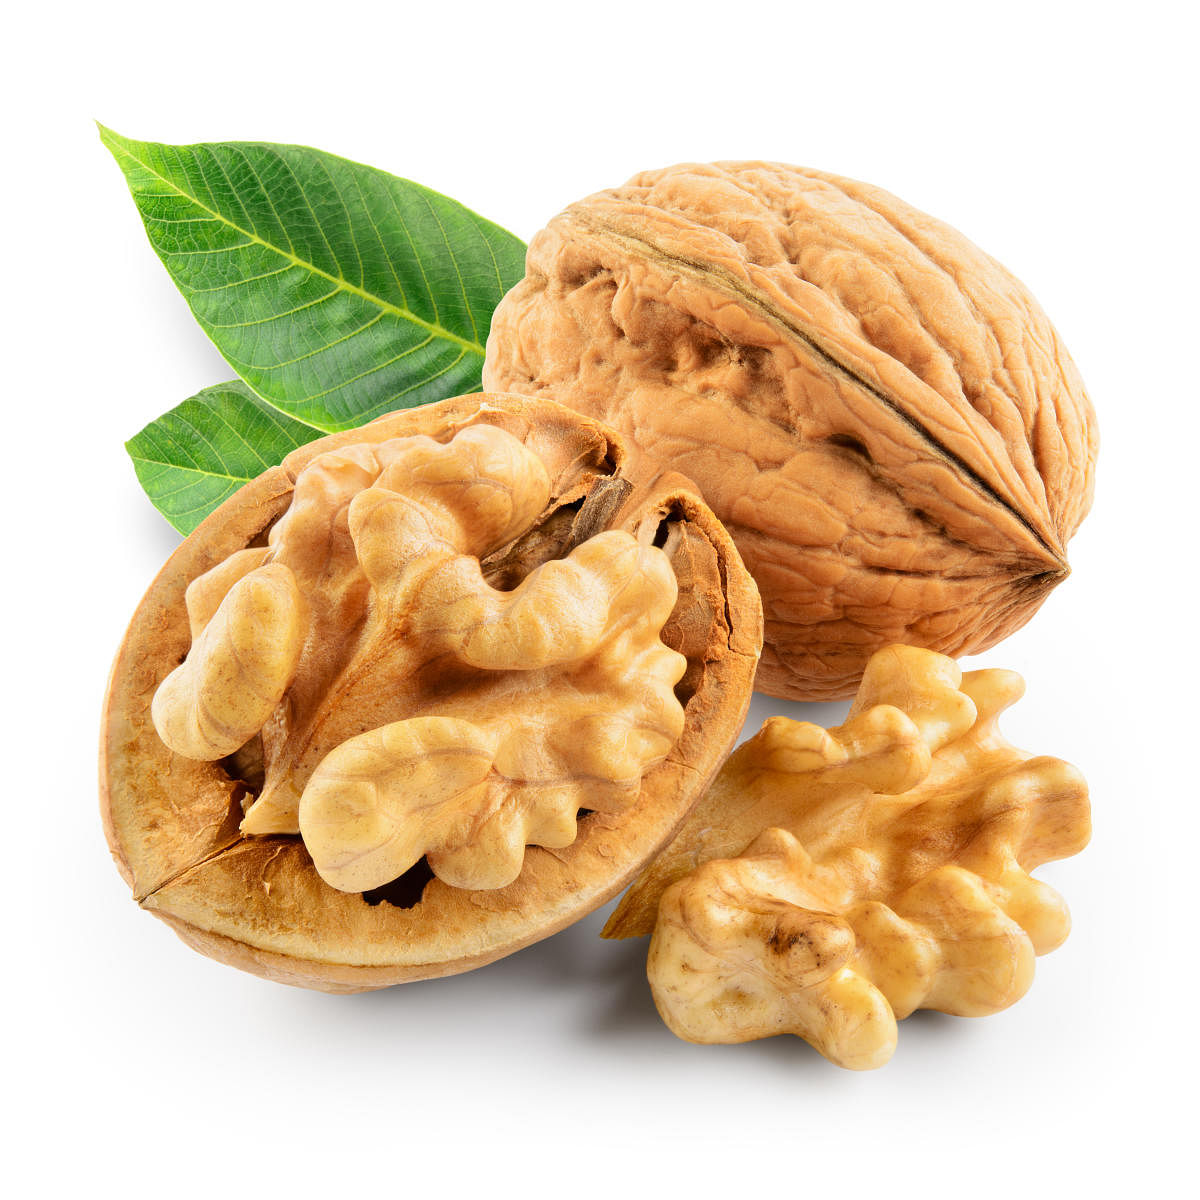 The research, published in the Journal of the American Heart Association, examined the effects of replacing some of the saturated fats in participants' diets with walnuts. File photo